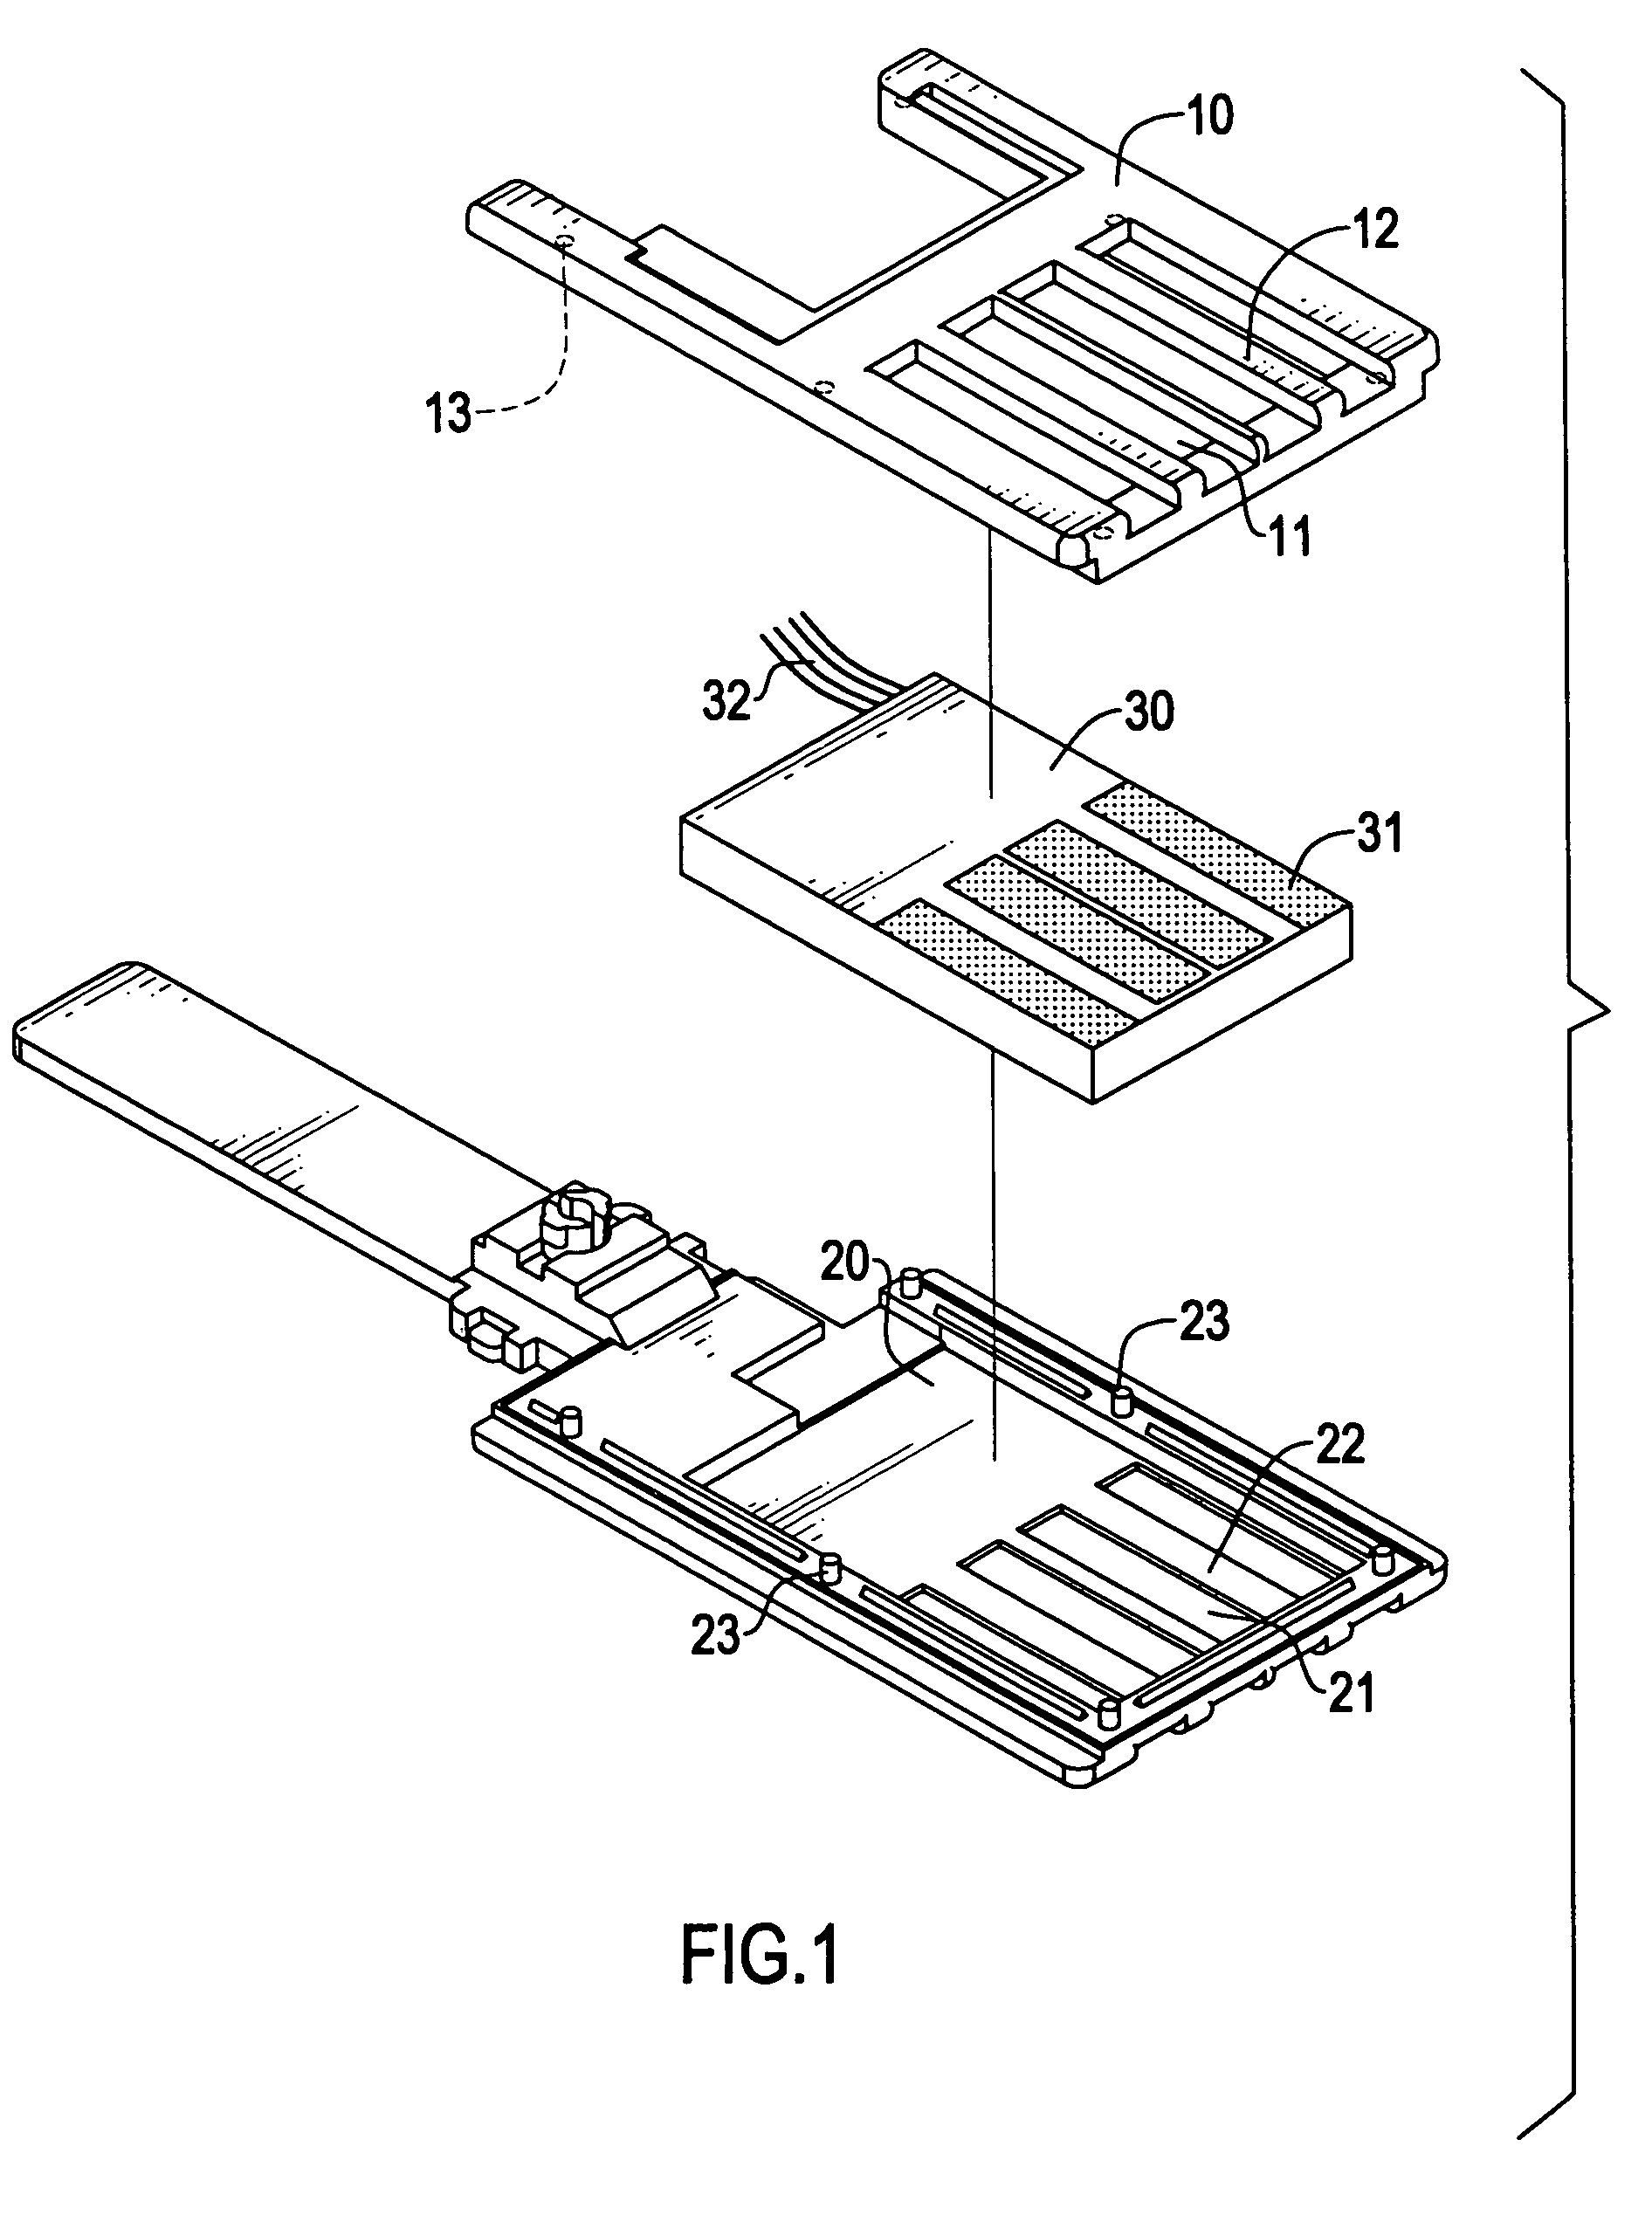 USB plug with two sides alternately connectable to a USB port